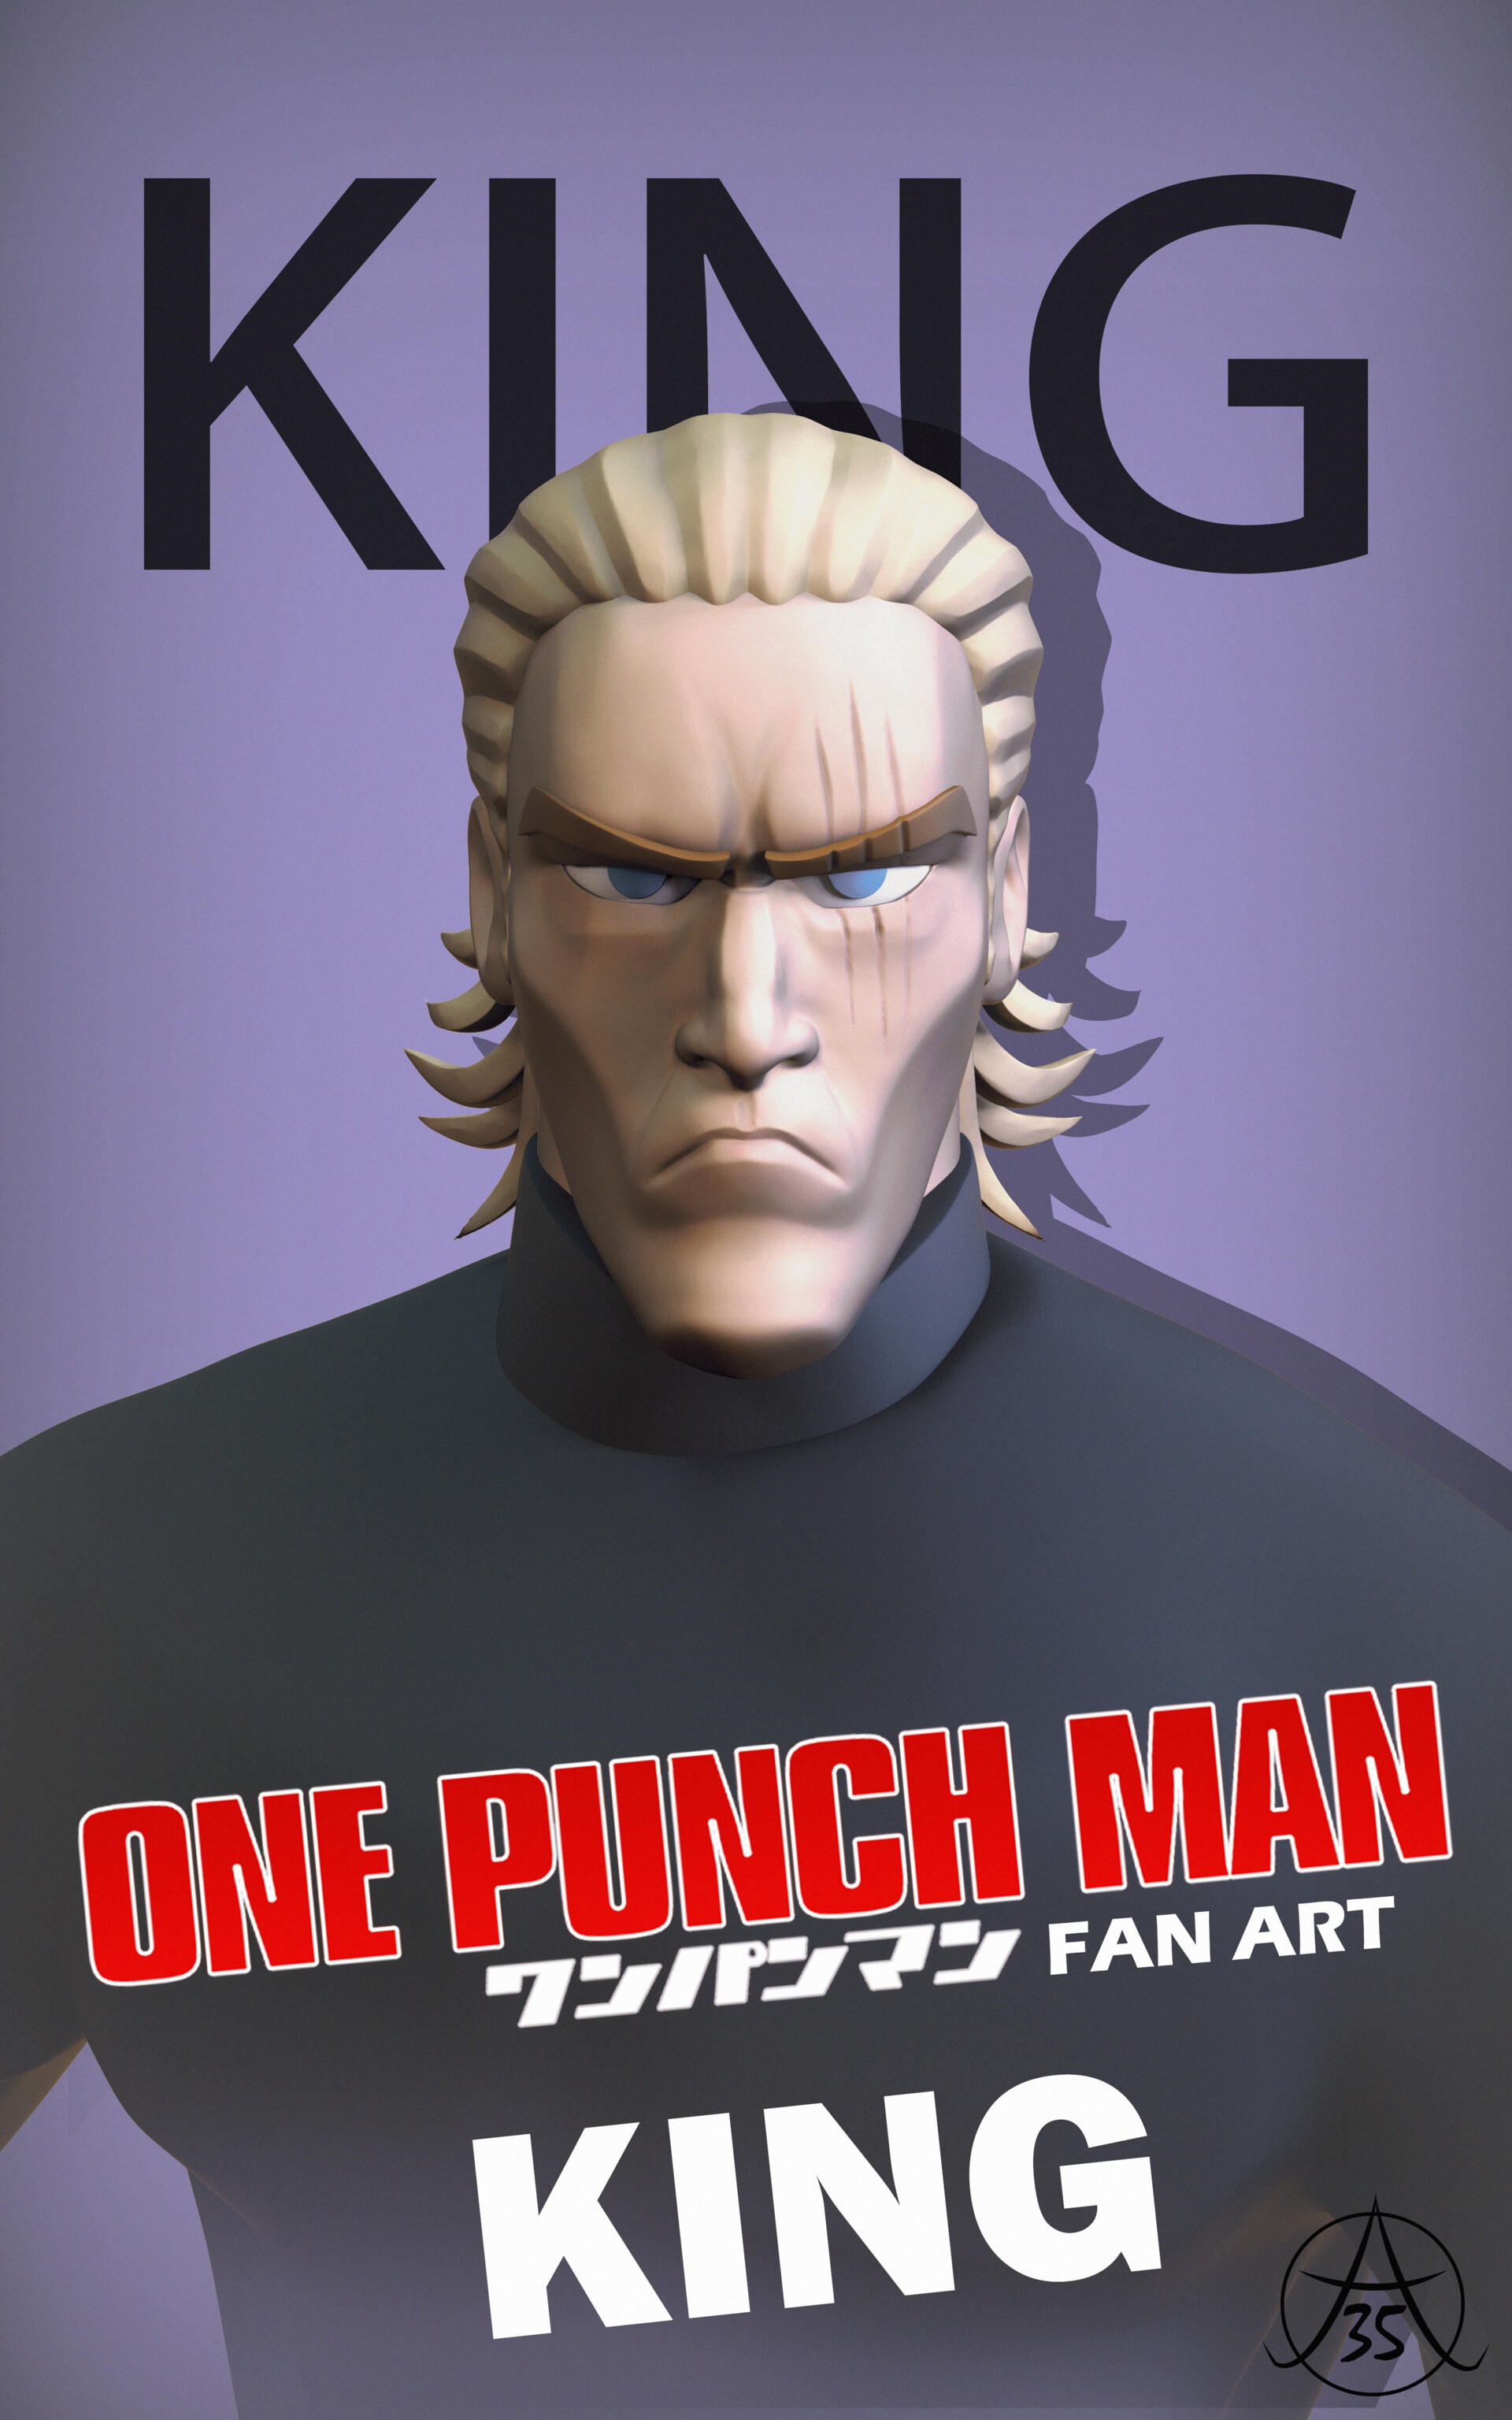 KING (One Punch man) - ALL STAR TOWER DEFENSE (FAN MADE) 